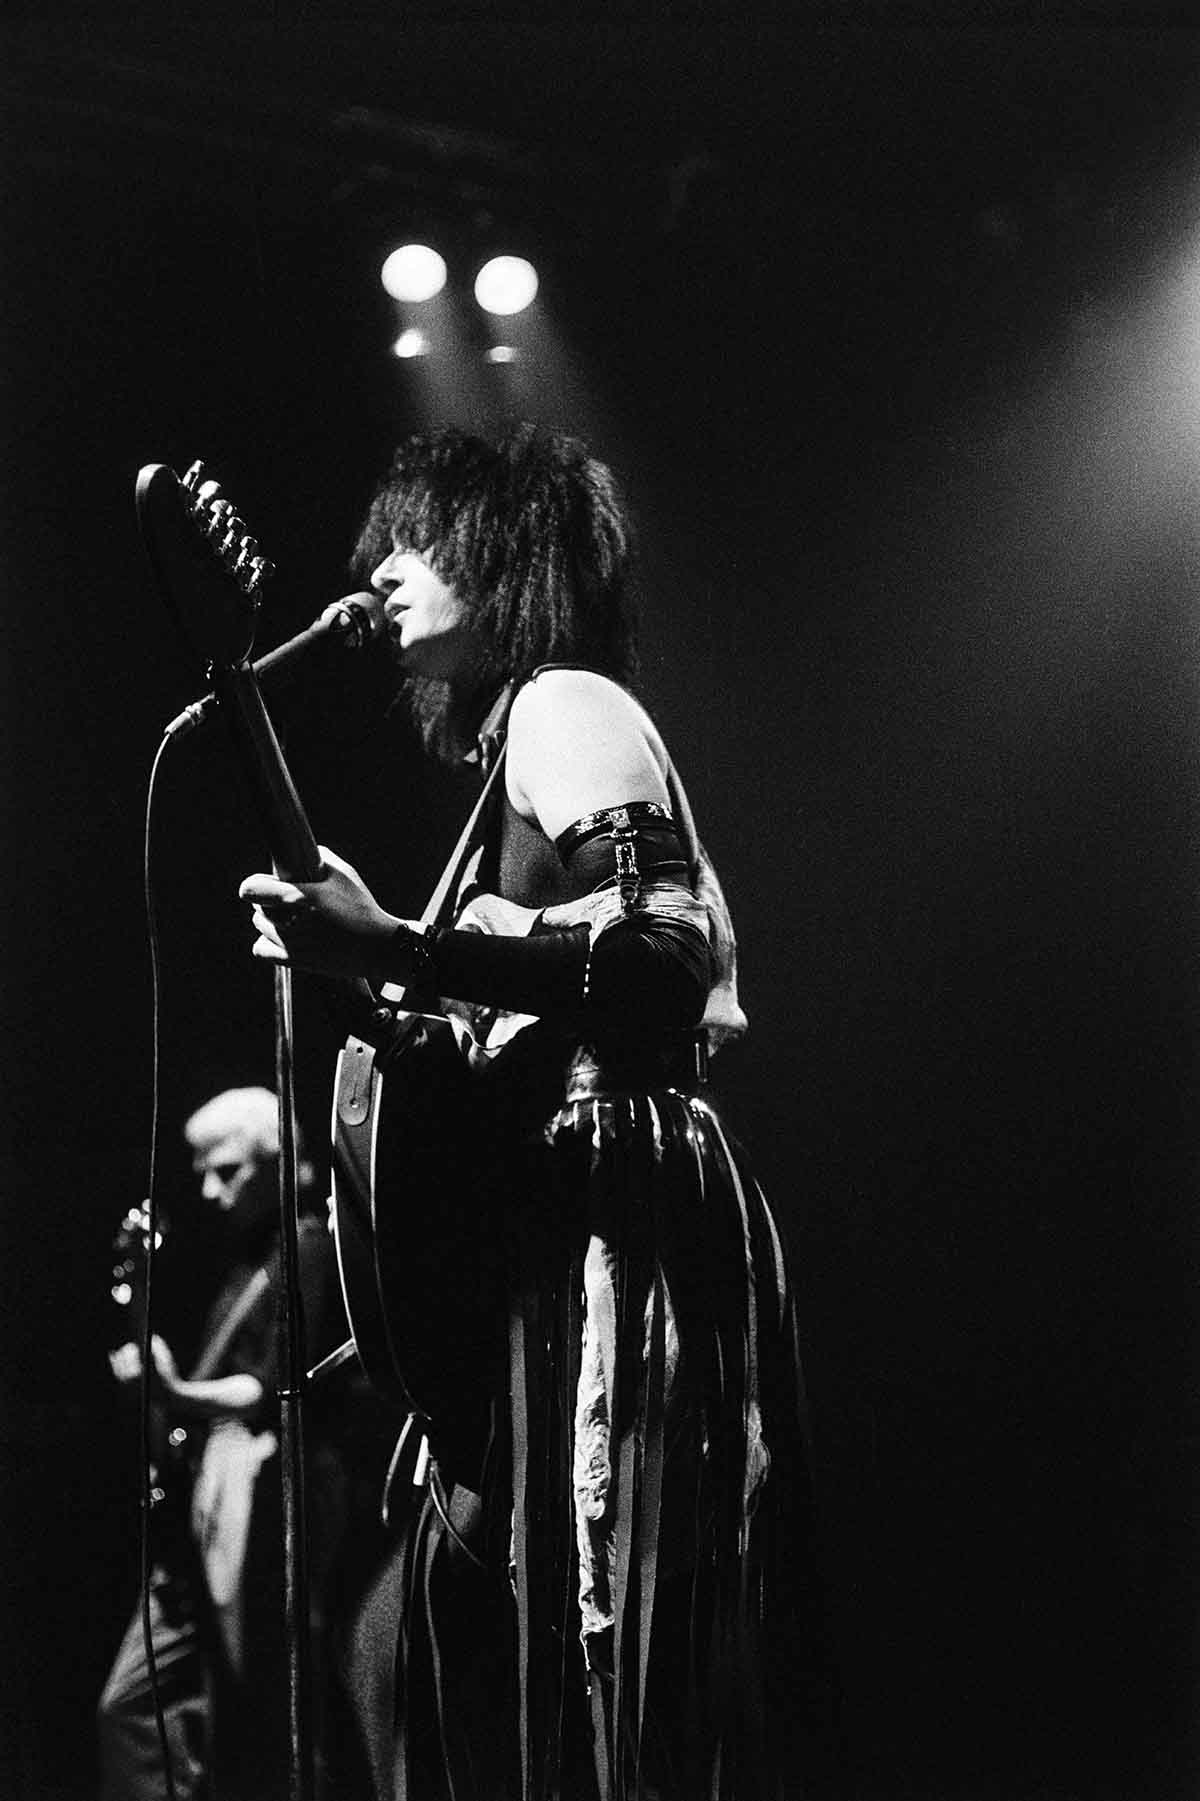 Live photos of experimental New Wave, Noise, Post-Punk, Industrial en Avantgarde bands inge-bekkers-photography-siouxsie-and-the-banshees-pandora-music-box-1983-live-alternative-bands-0329-fotografie